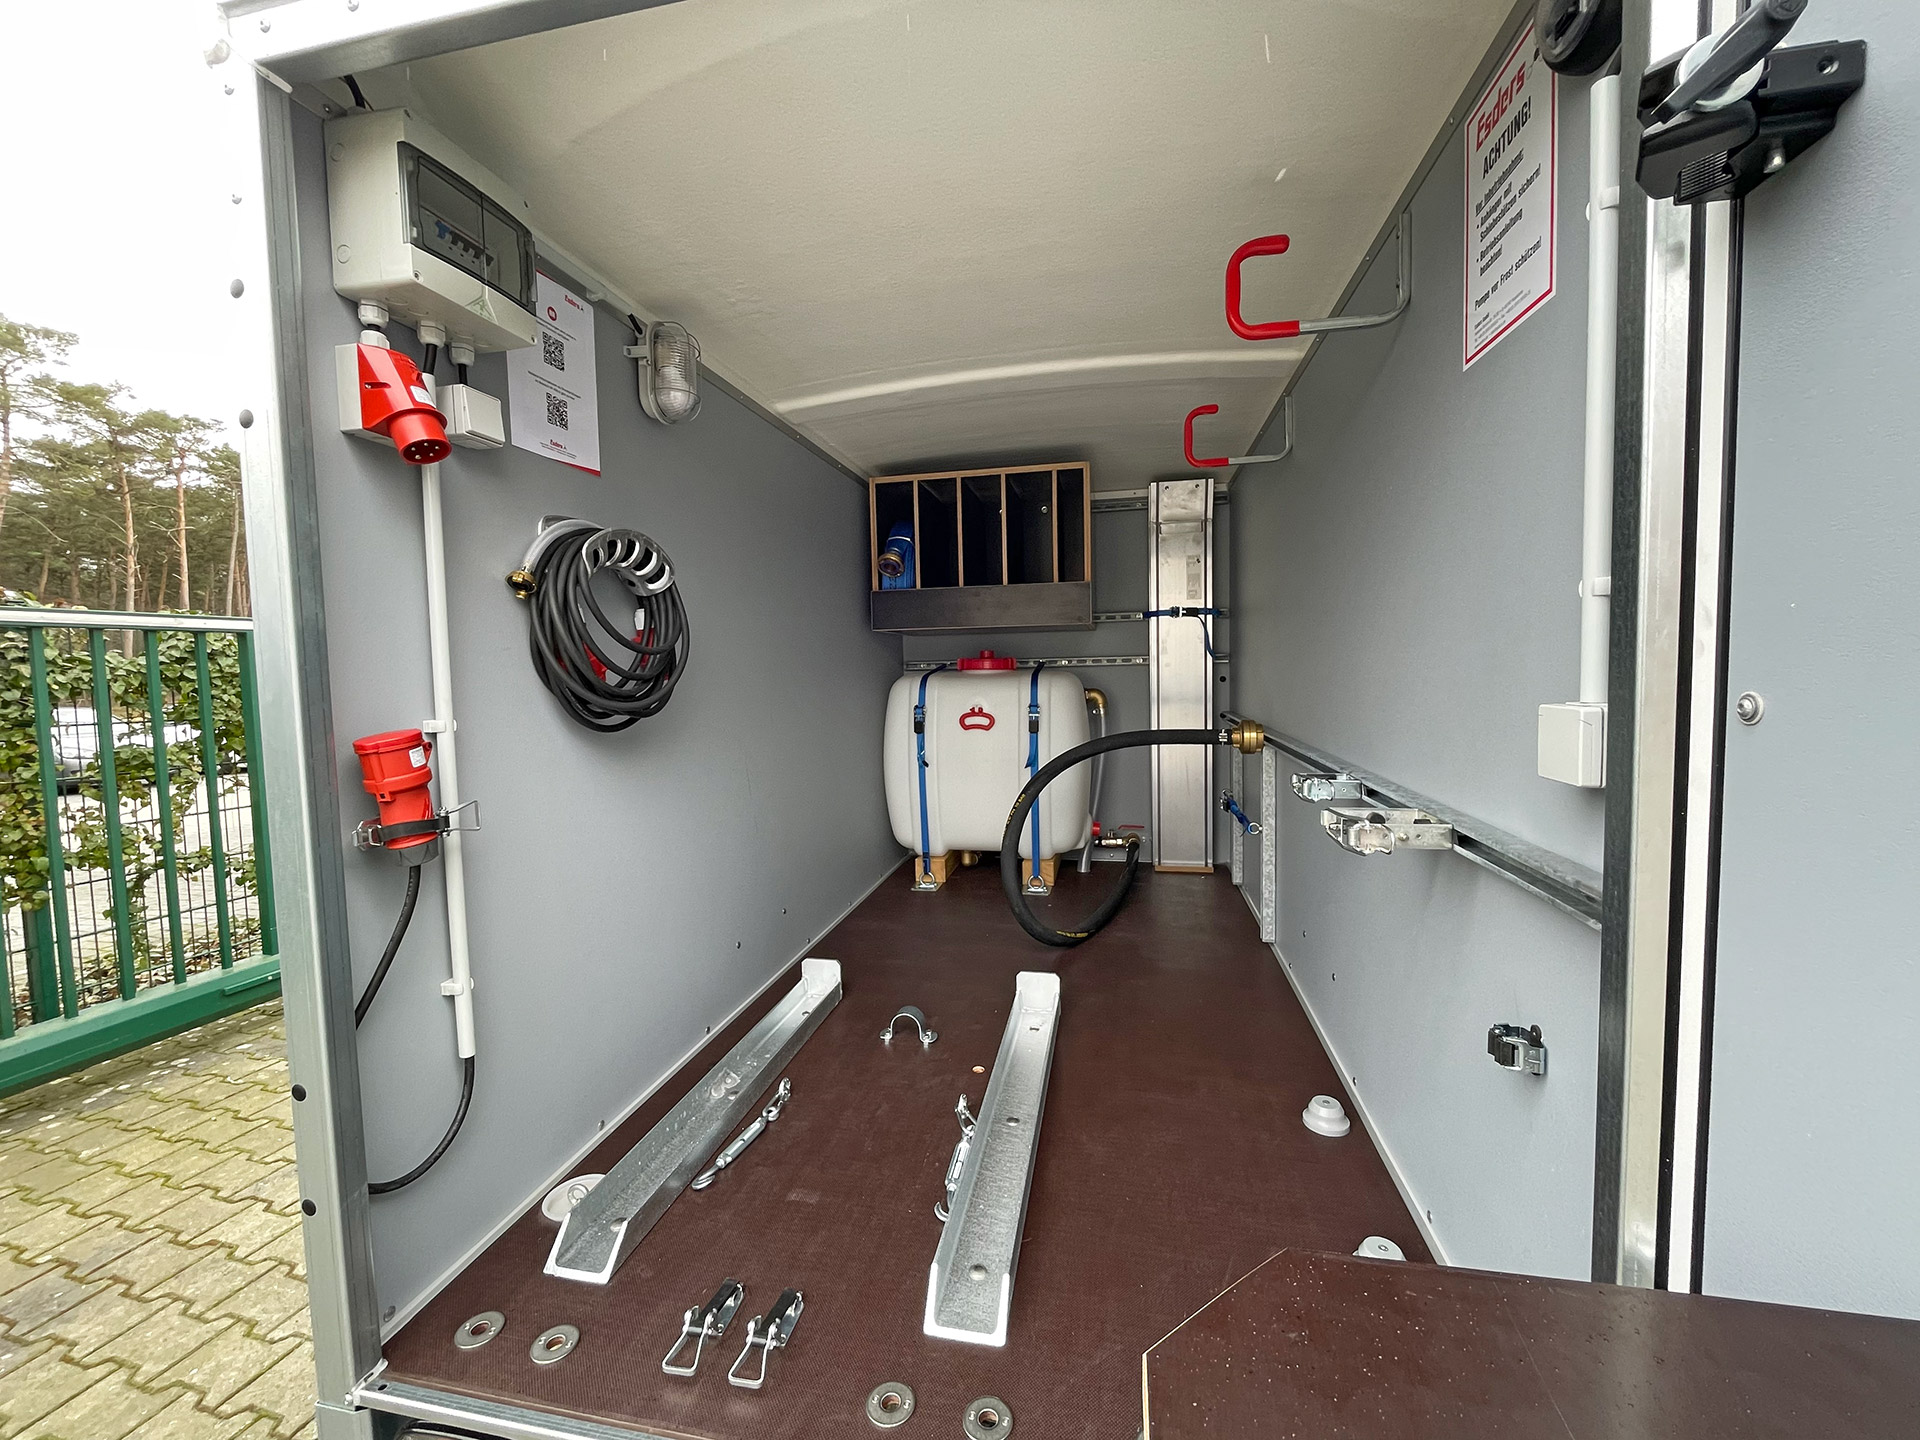 The inside of our pressure test trailer